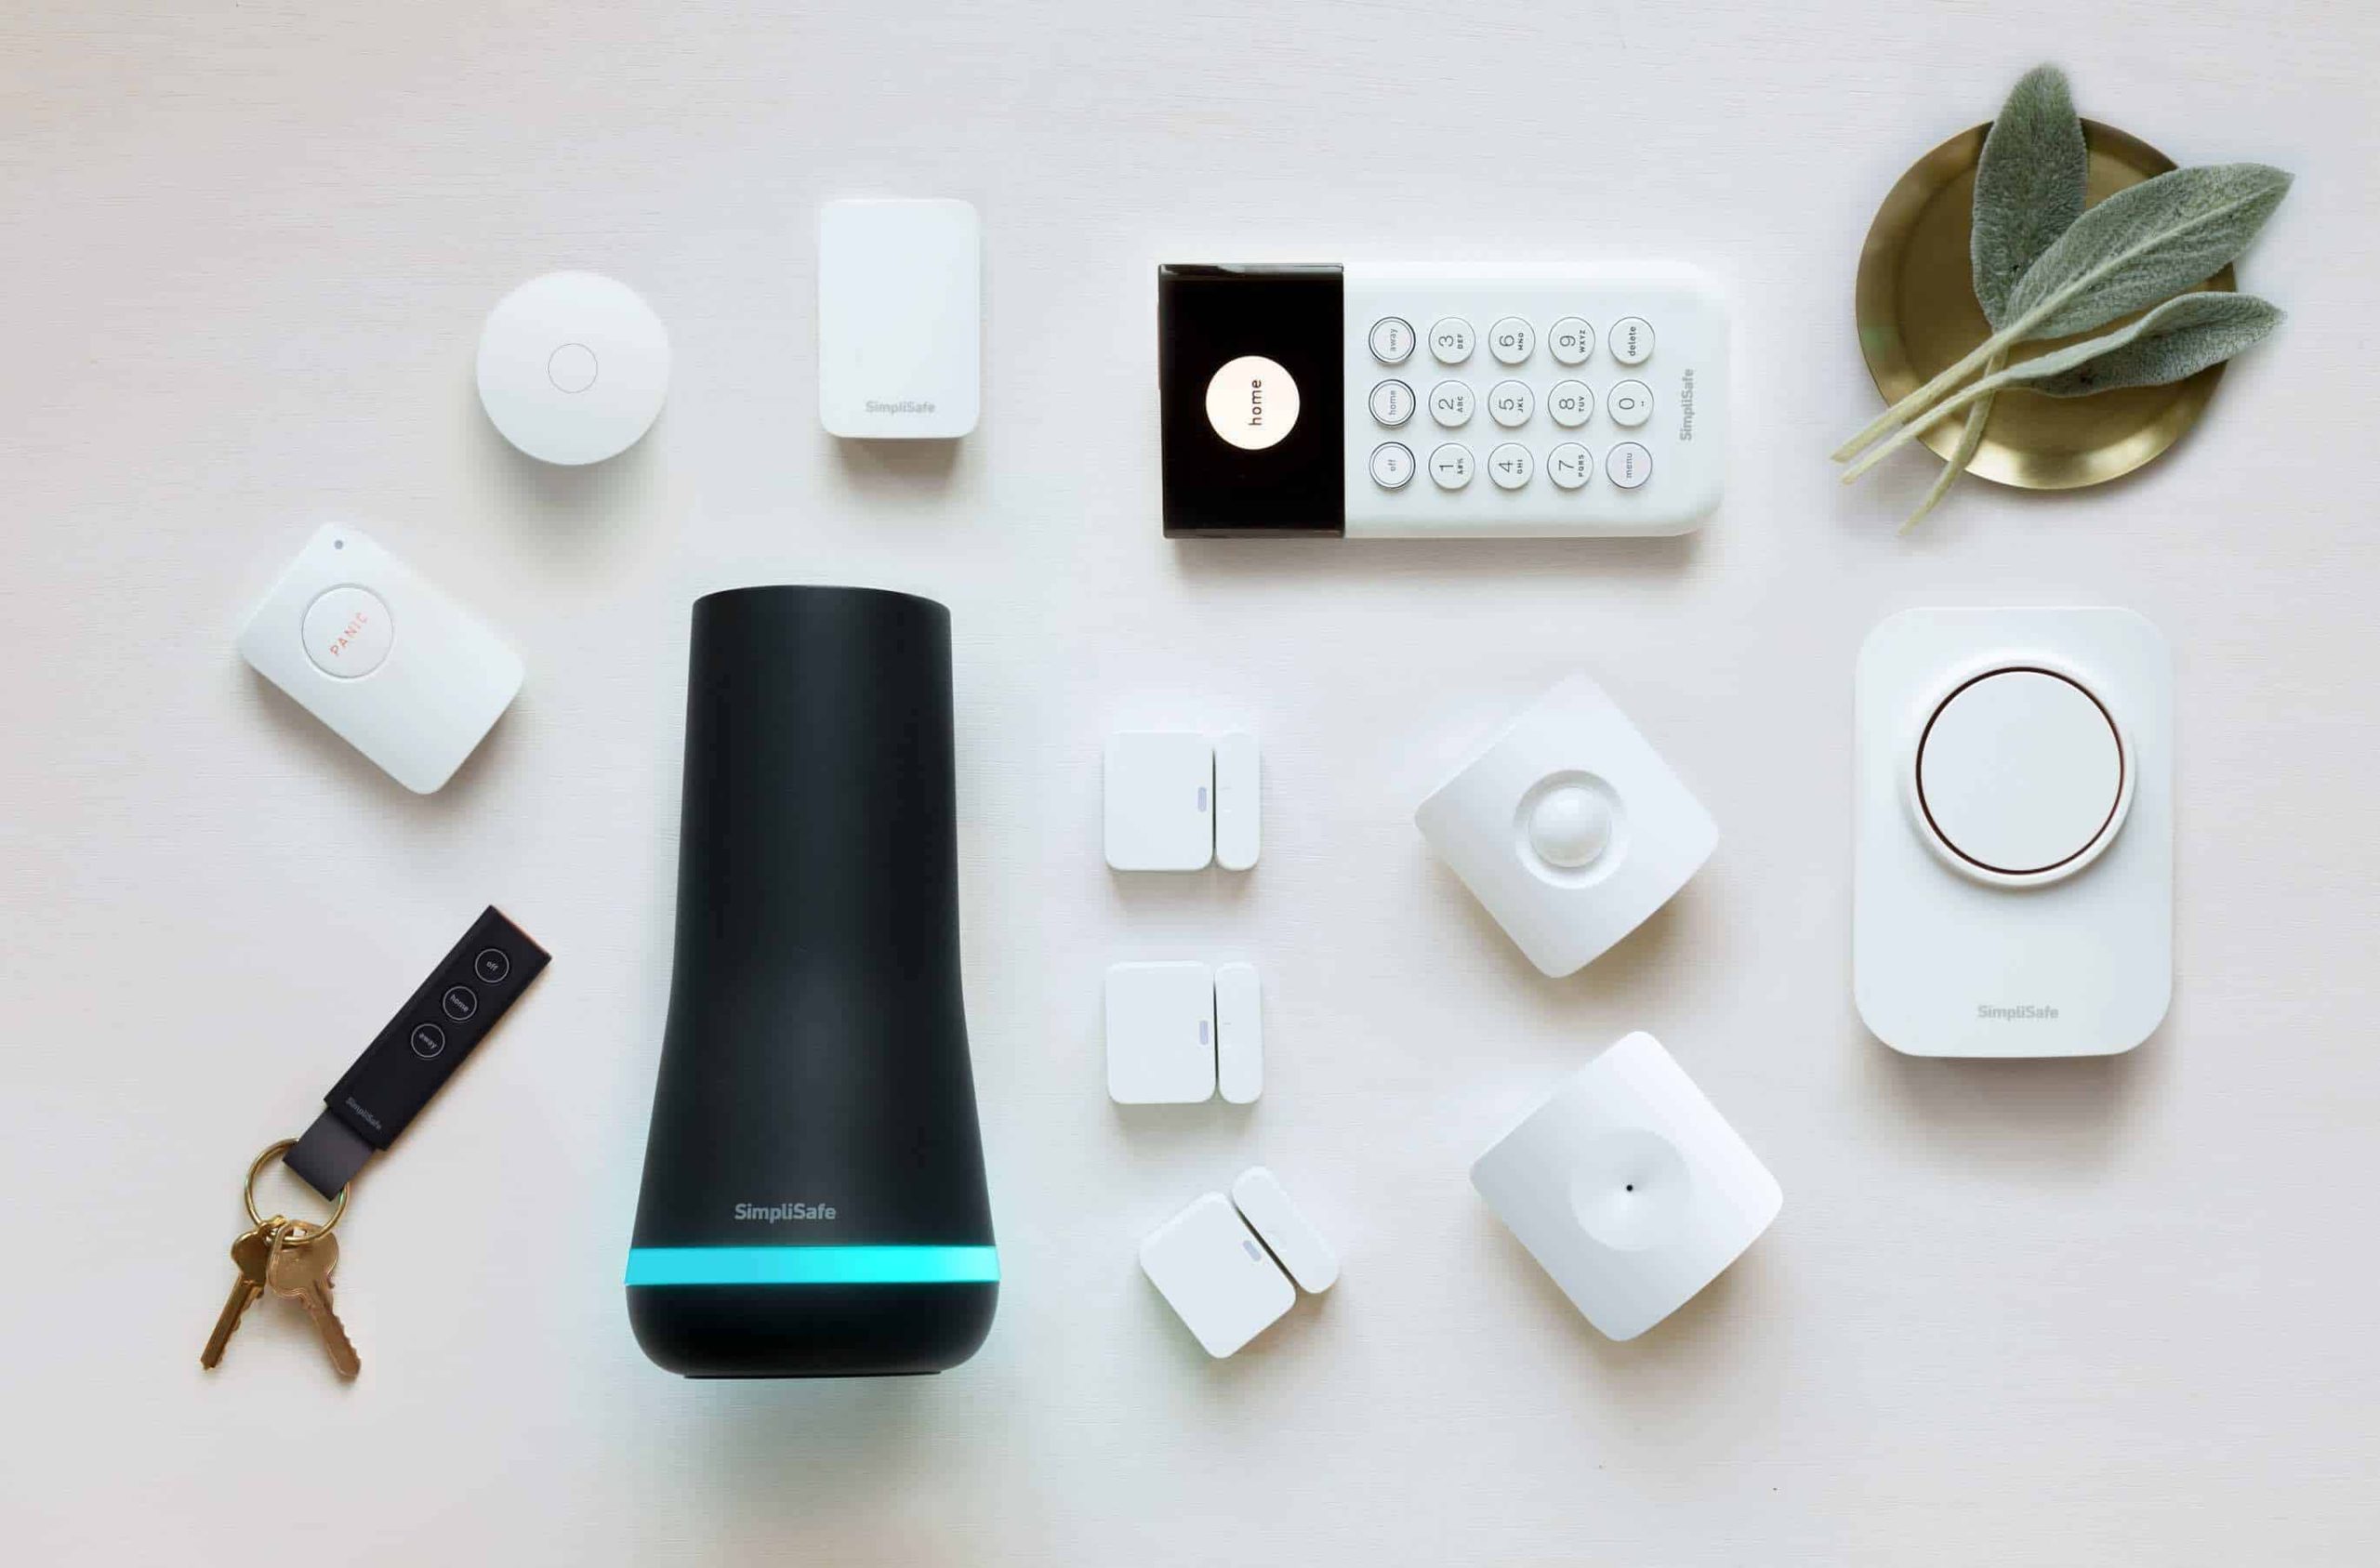 Does Simplicam Work Without Simplisafe System